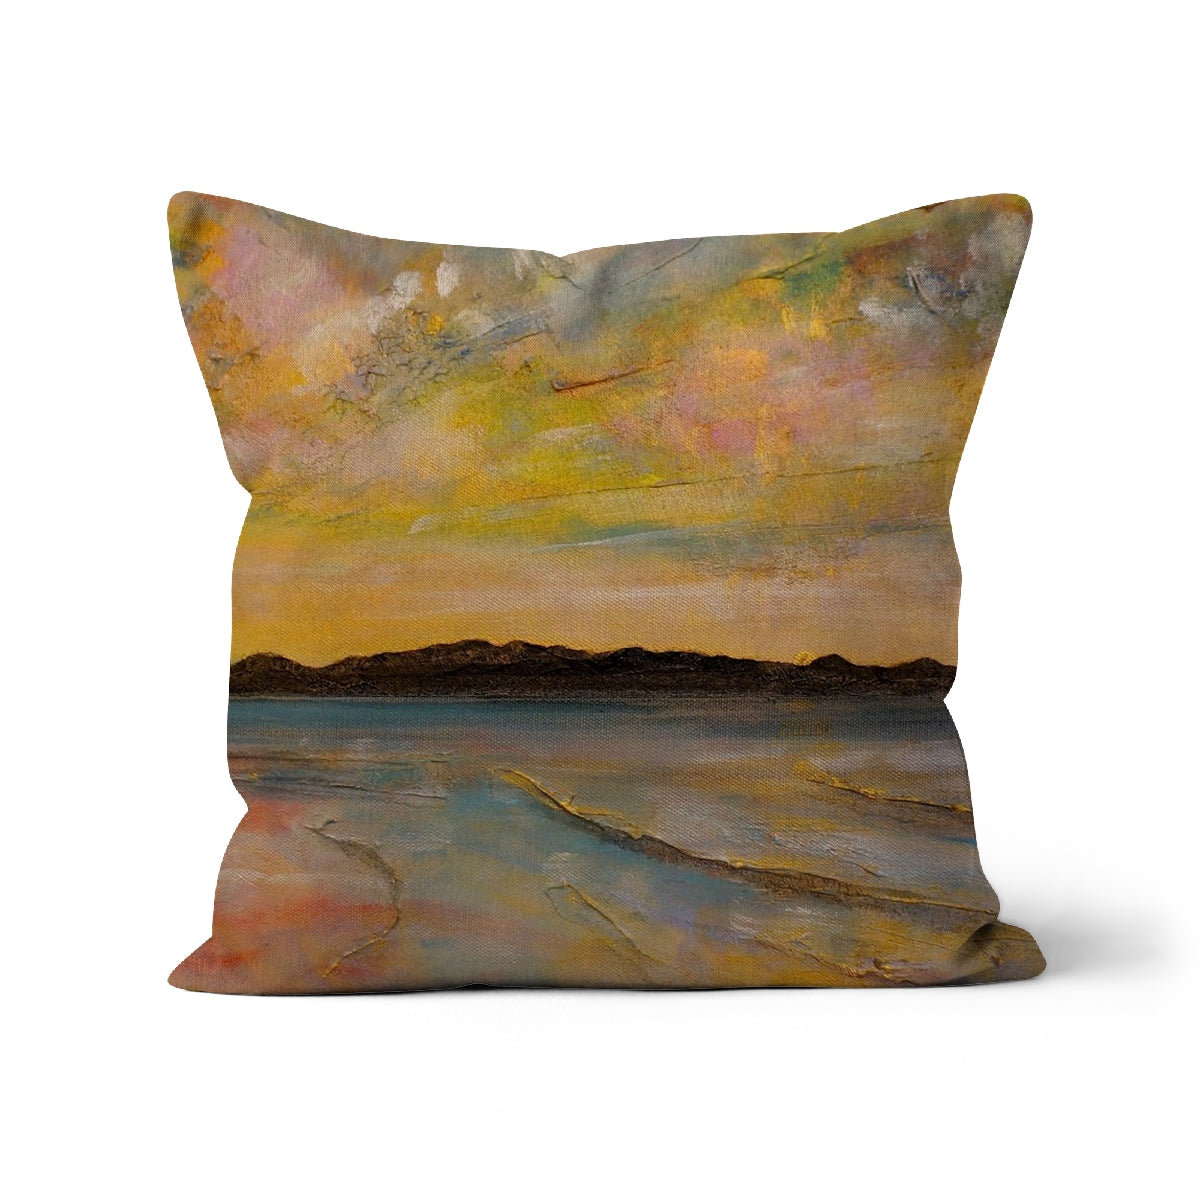 Vallay Island North Uist Art Gifts Cushion-Cushions-Hebridean Islands Art Gallery-Canvas-24"x24"-Paintings, Prints, Homeware, Art Gifts From Scotland By Scottish Artist Kevin Hunter